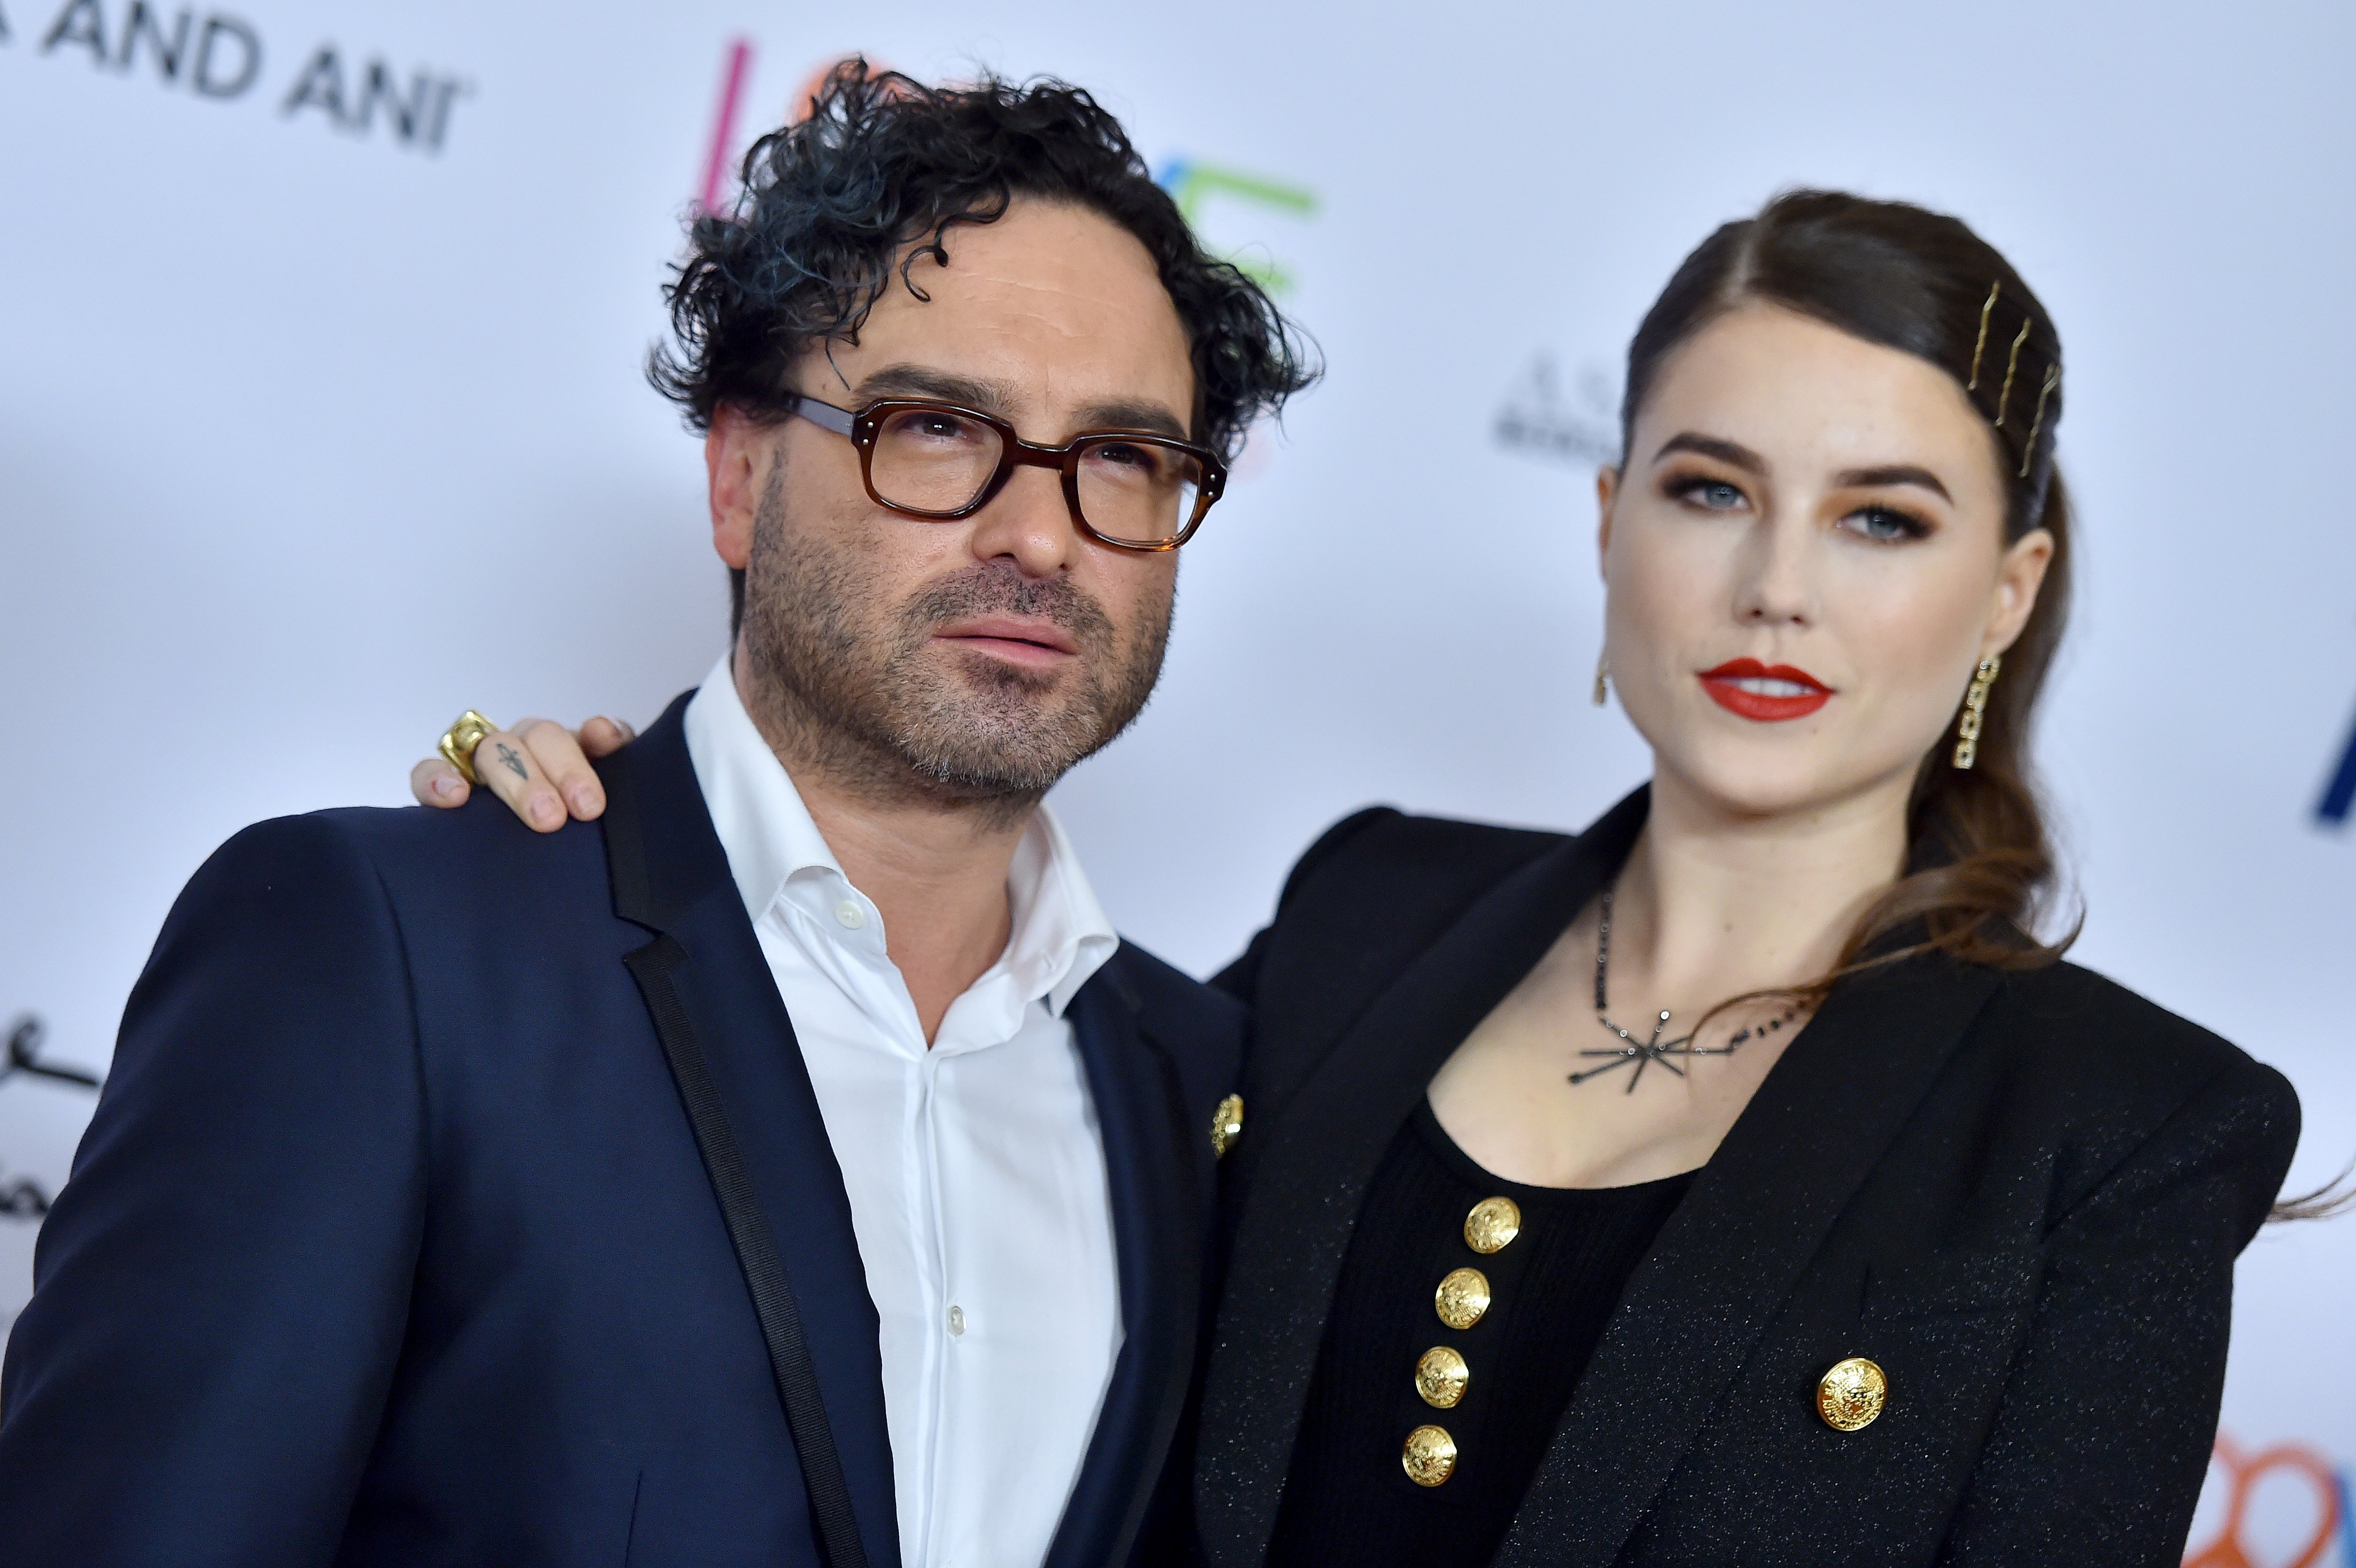 Johnny Galecki and Alaina Meyer attend the 26th Annual Race to Erase MS Gala at The Beverly Hilton Hotel on May 10, 2019 in Beverly Hills, California. | Source: Getty Images